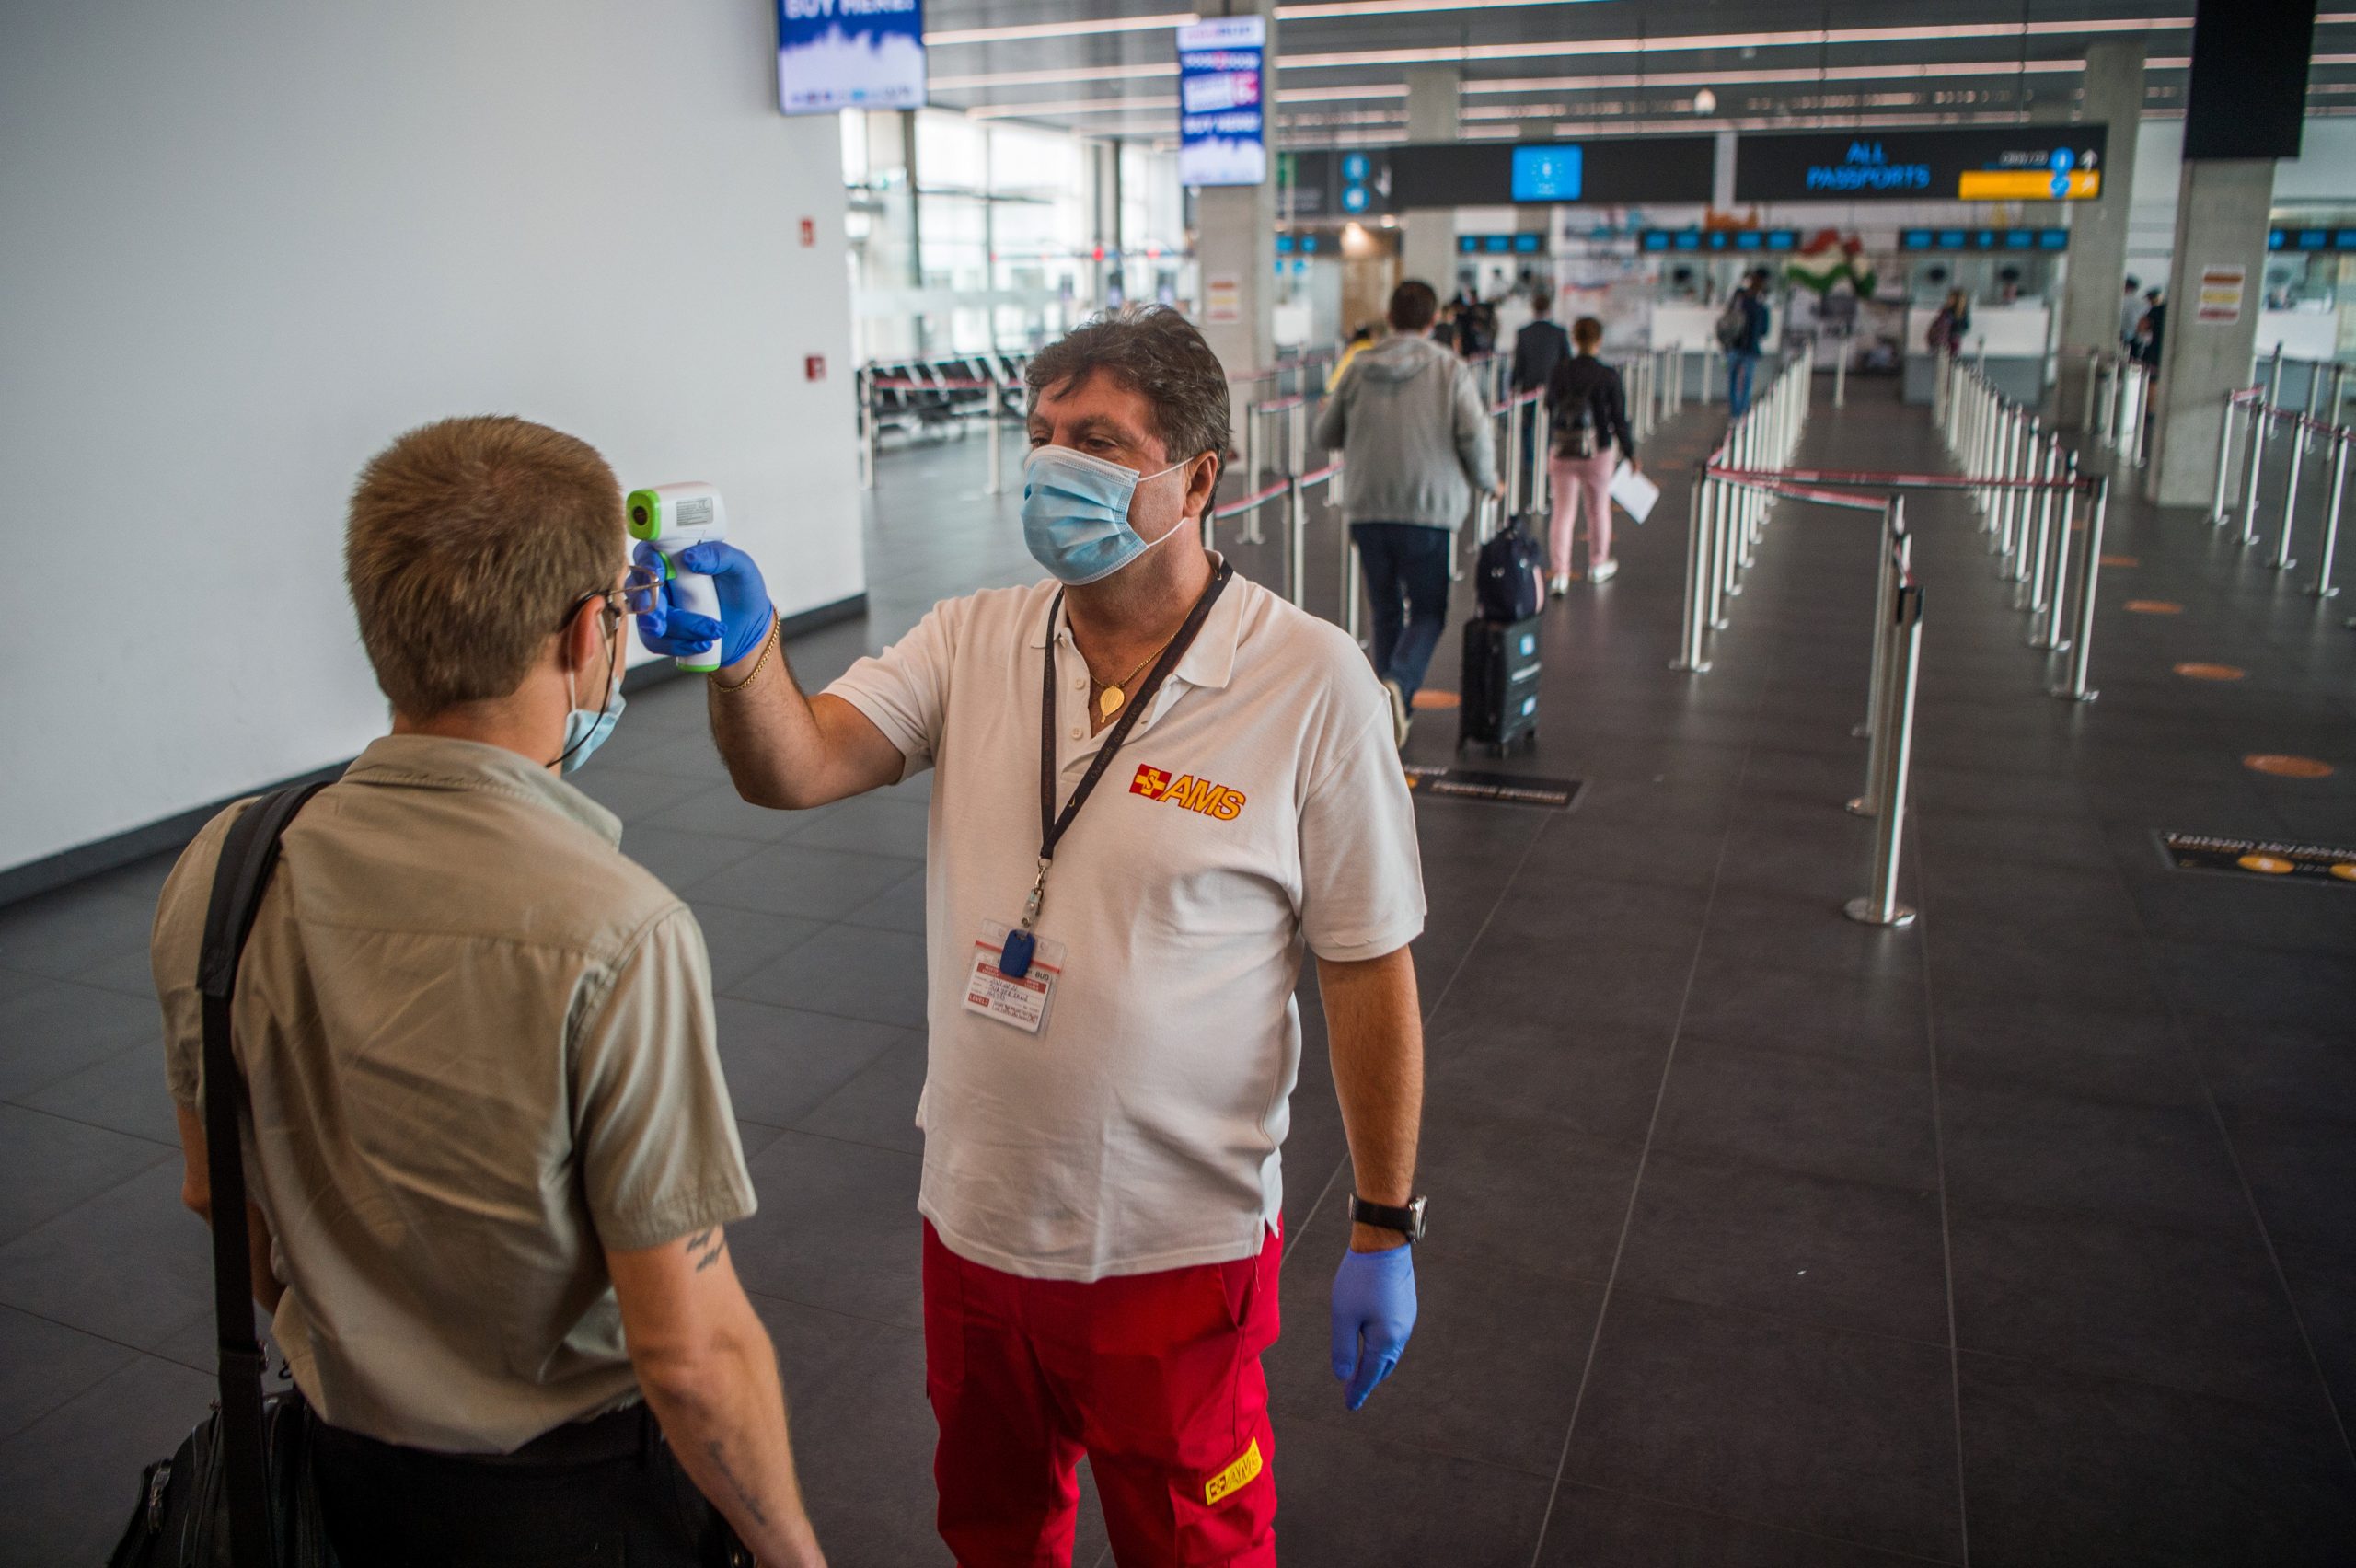 Coronavirus: Hungary Joins Restrictions on Travellers from Southern Africa Over New Covid Variant